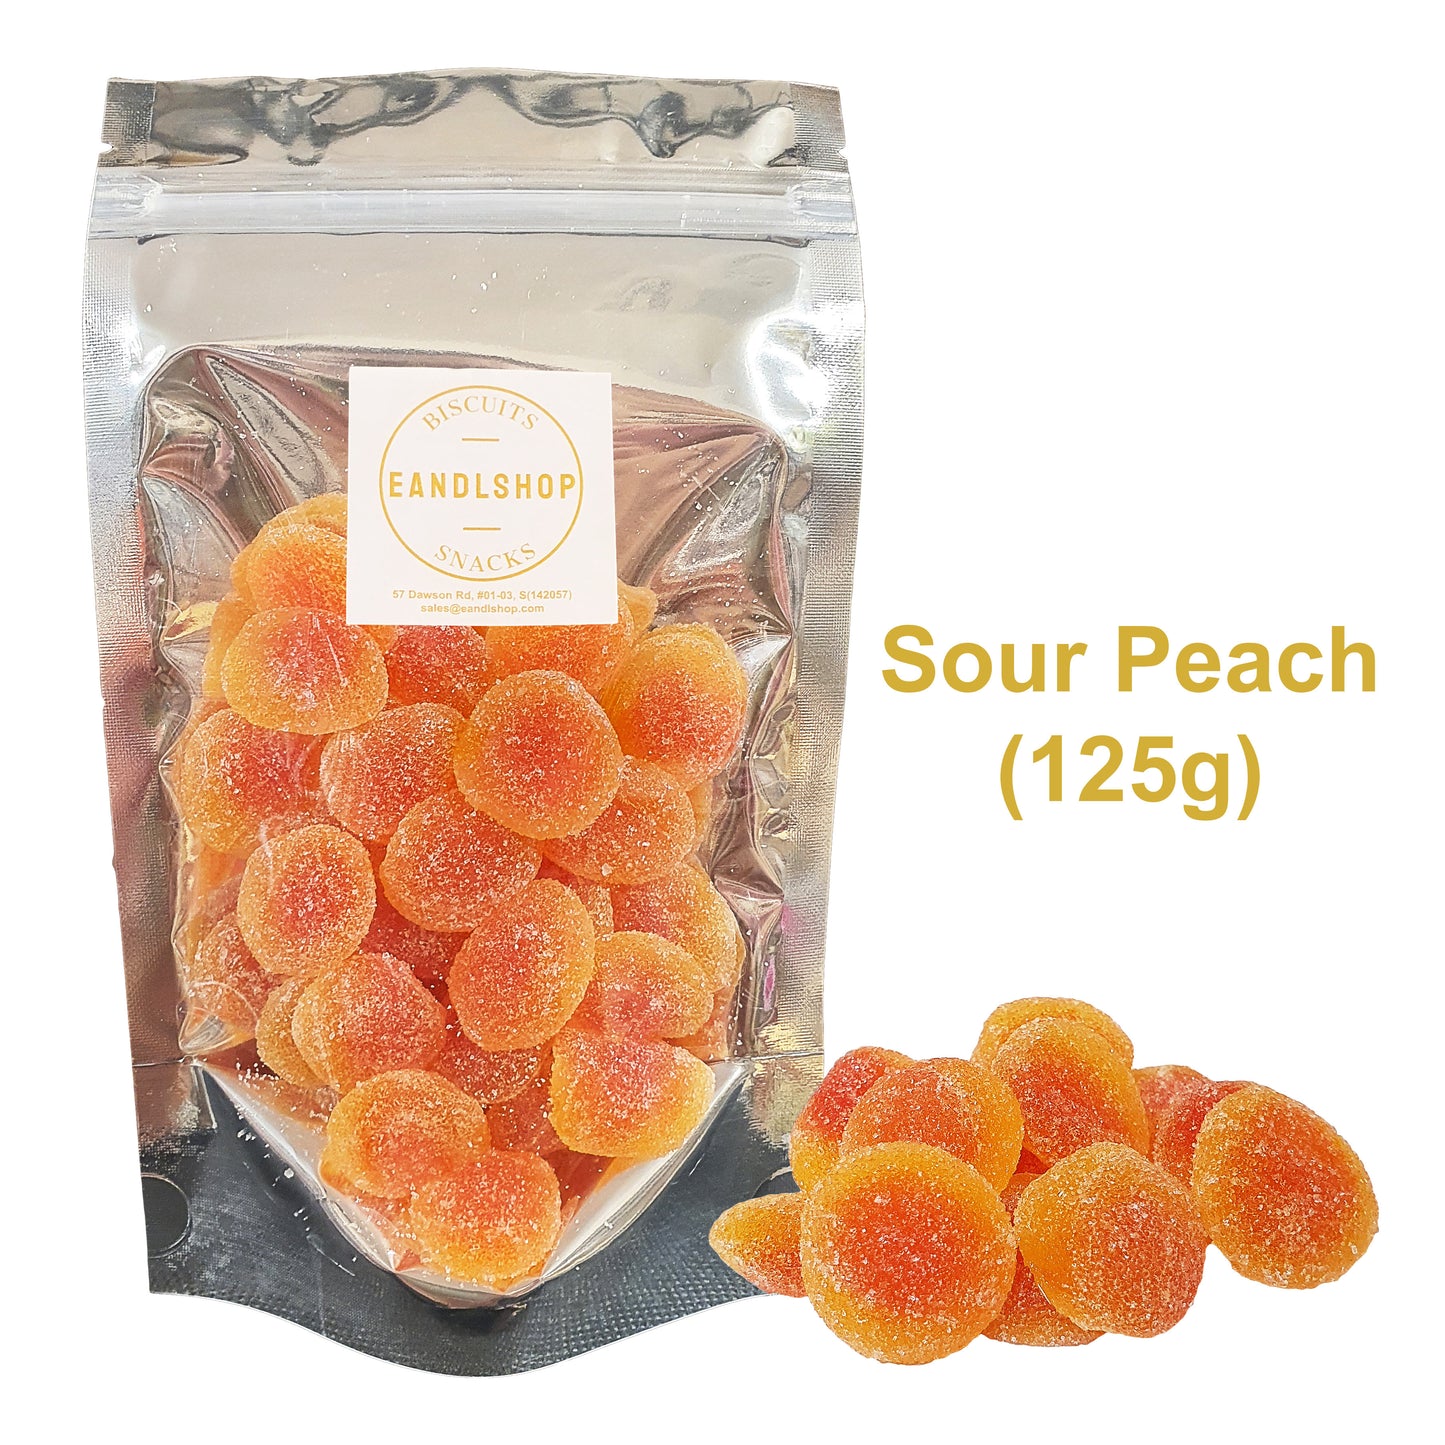 Sour Peach. Old-school biscuits, modern snacks (chips, crackers), cakes, gummies, plums, dried fruits, nuts, herbal tea – available at www.EANDLSHOP.com